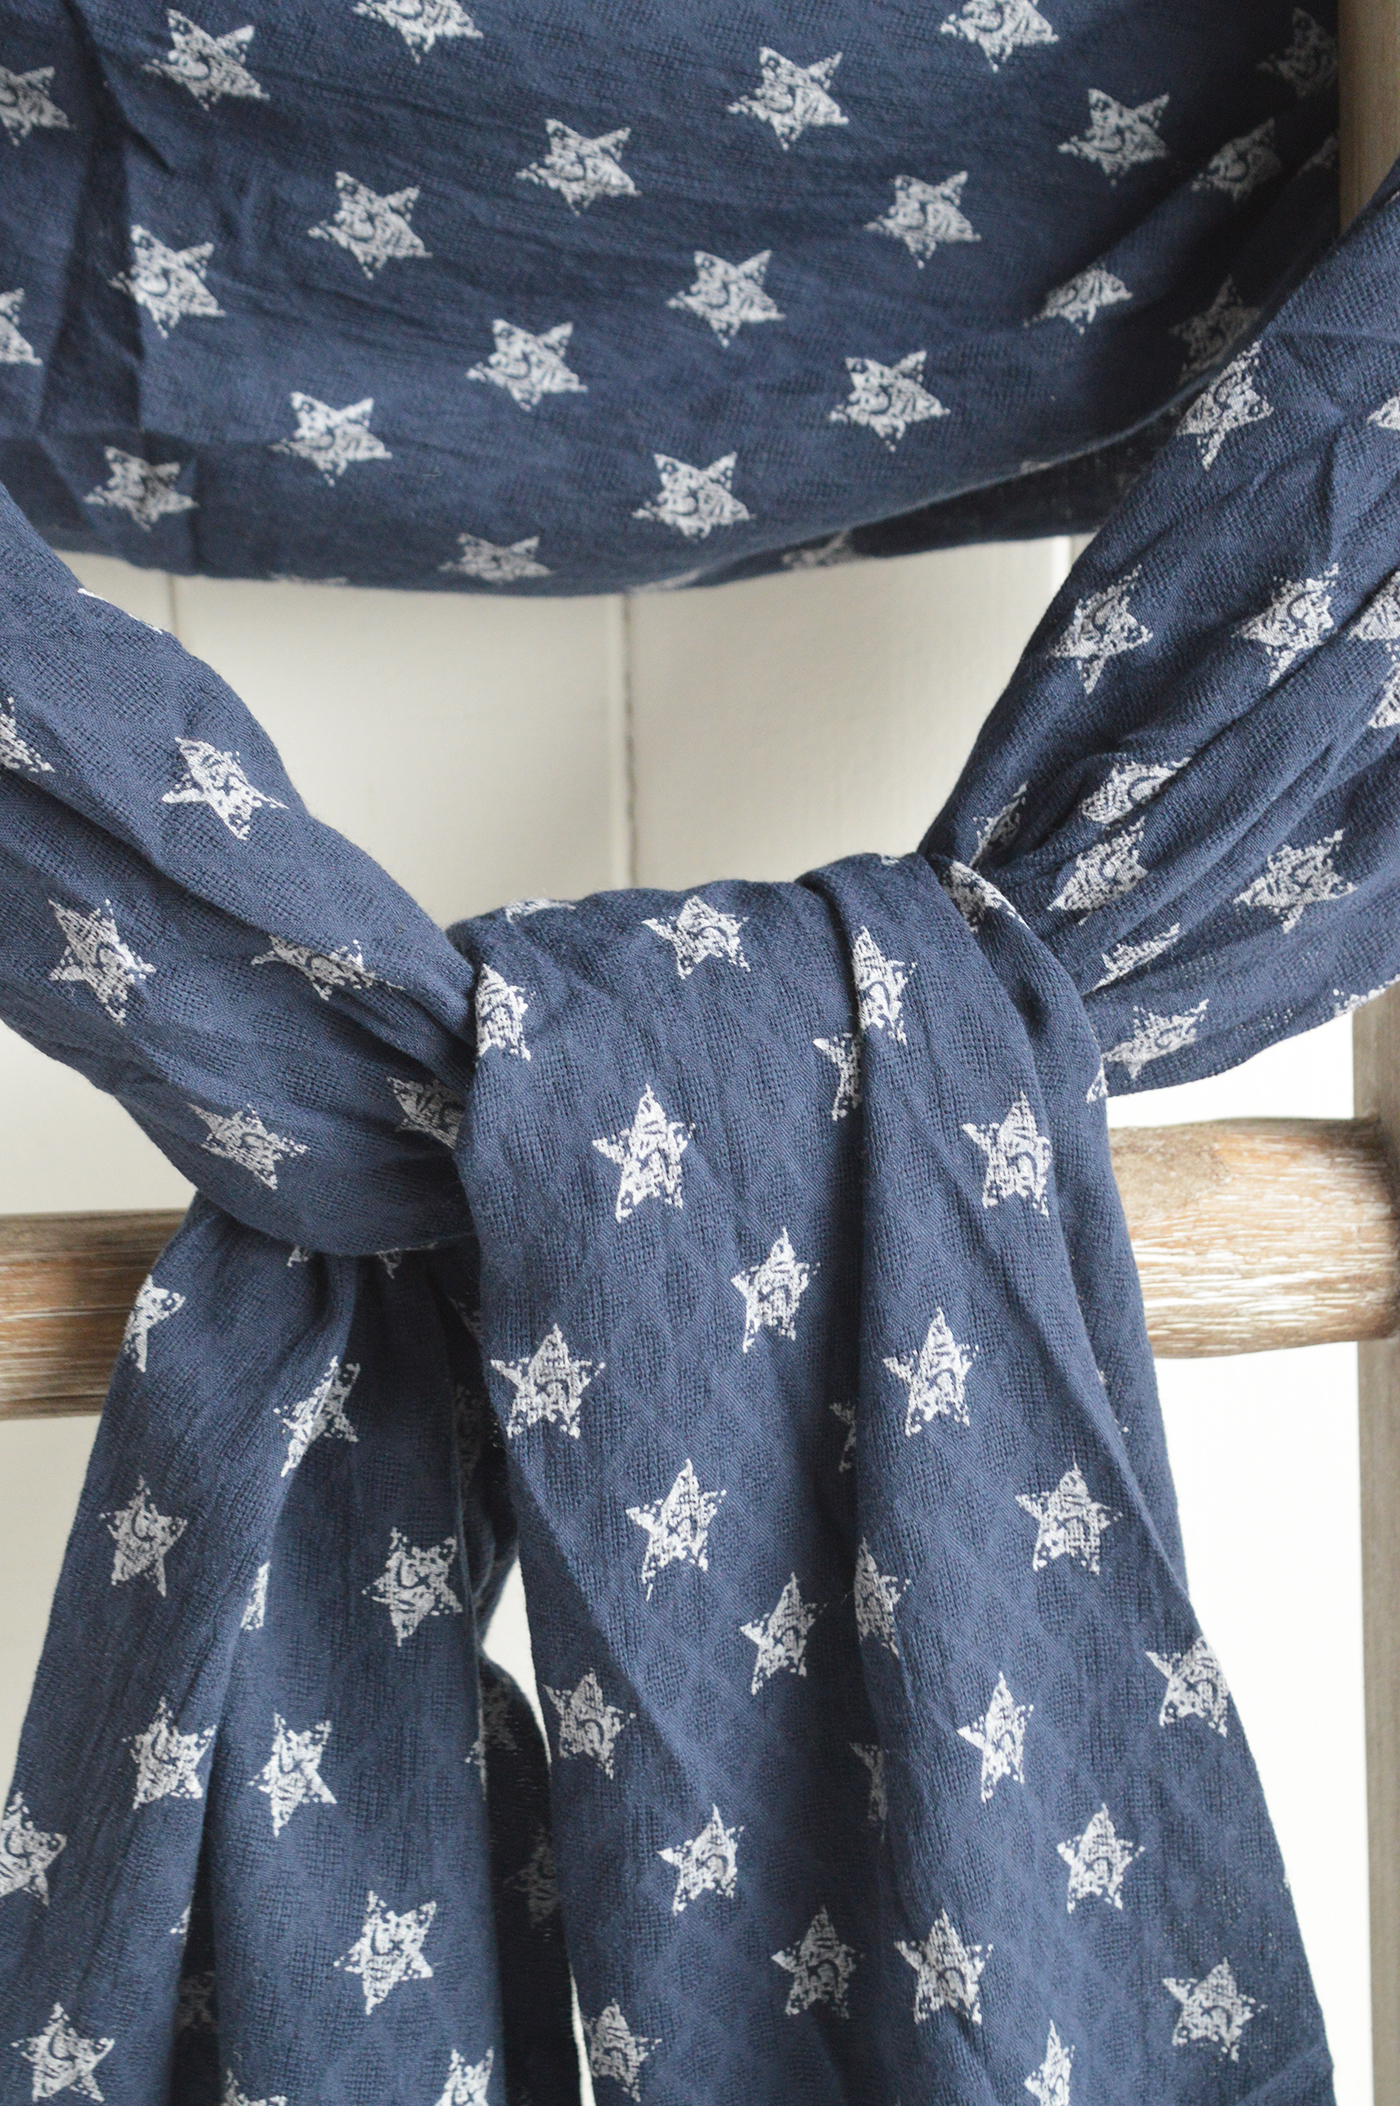 Navy Star Scarf The White Lighthouse. New England, White, Country and Nautical Coastal White Furniture, lifestyle and accessories for home interiors. White Star Scarf. Hallway, Living Room, Bedroom, Bathroom Furniture and Home Decor Interiors as well as Lifestyle range of bags, scarves, umbrellas and jewellery